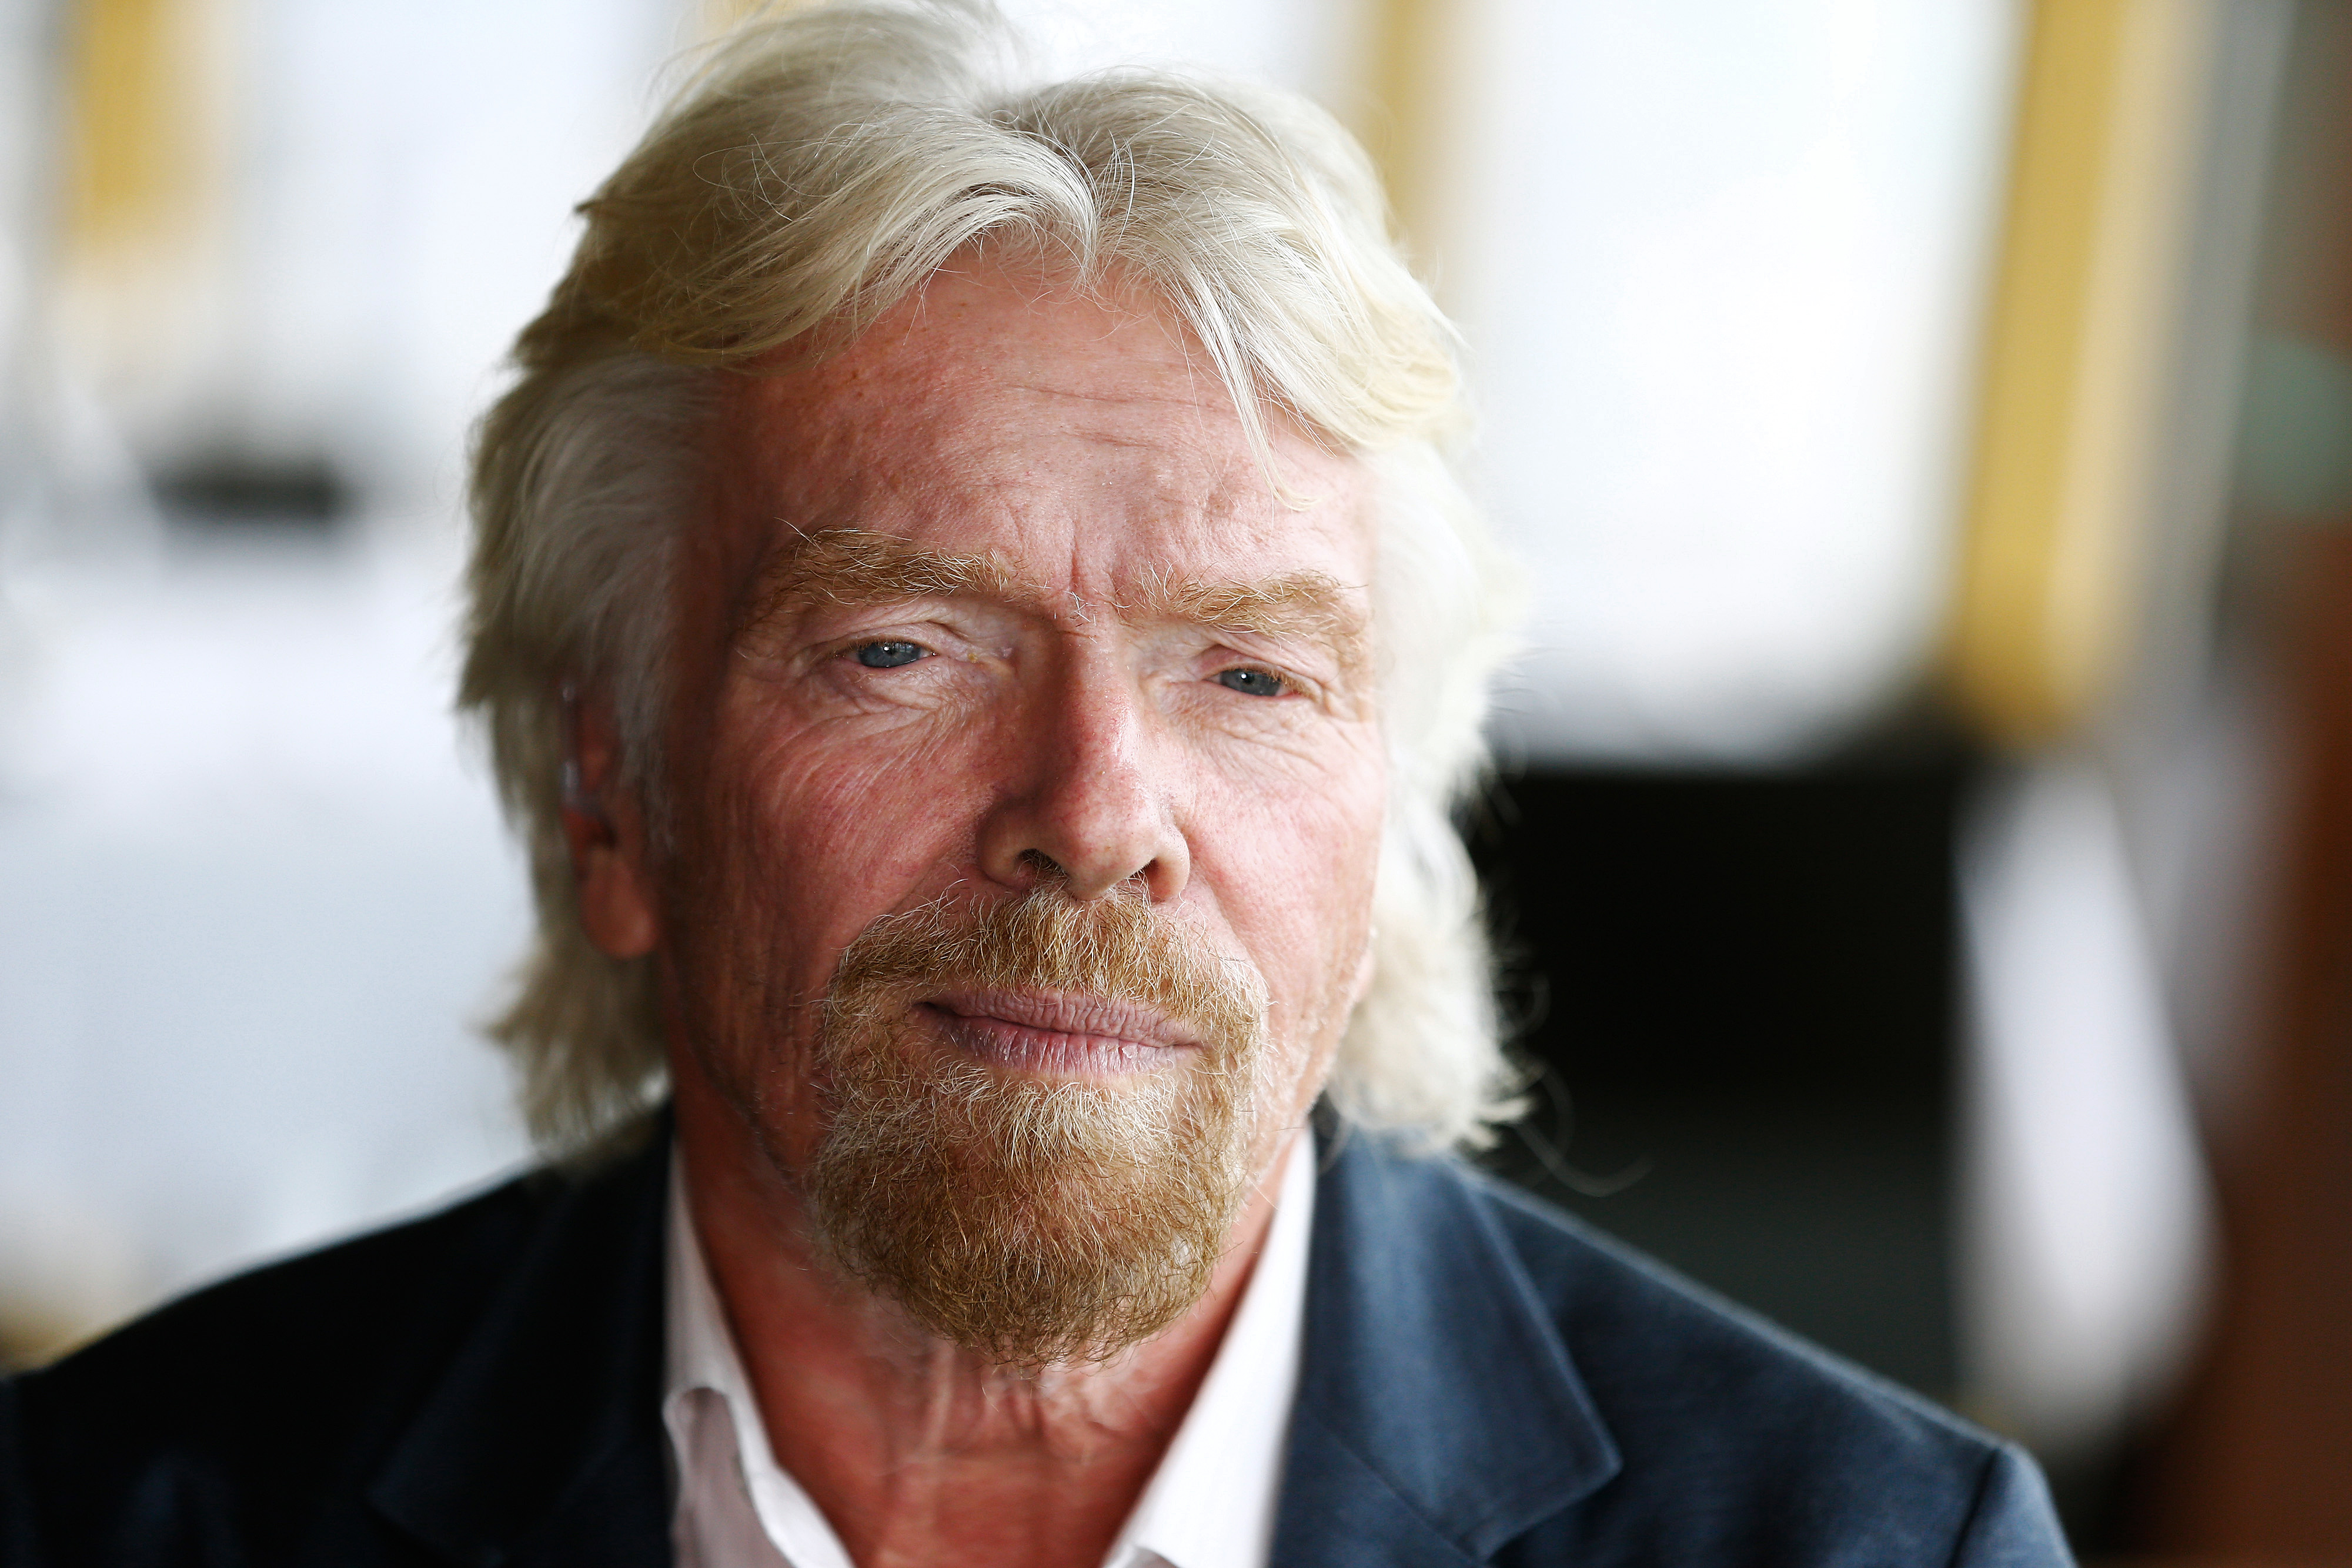 Billionaire Richard Branson, founder of Virgin Group, listens during a Bloomberg Television interview in Sydney, Australia, on May 26, 2016. (Brendon Thorne—Bloomberg/Getty Images)